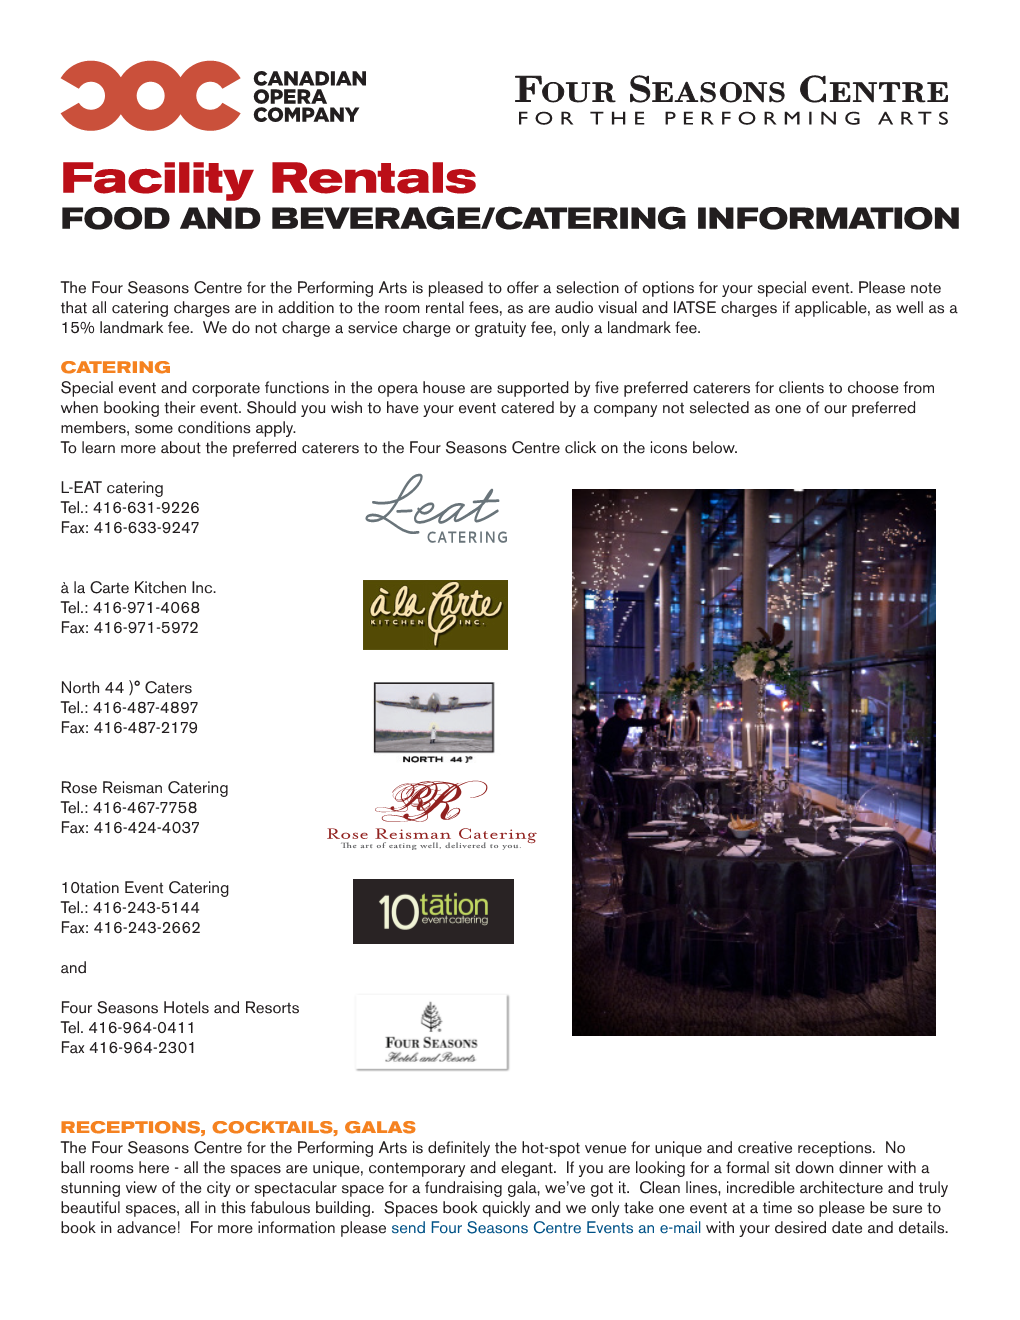 Facility Rentals FOOD and BEVERAGE/CATERING INFORMATION